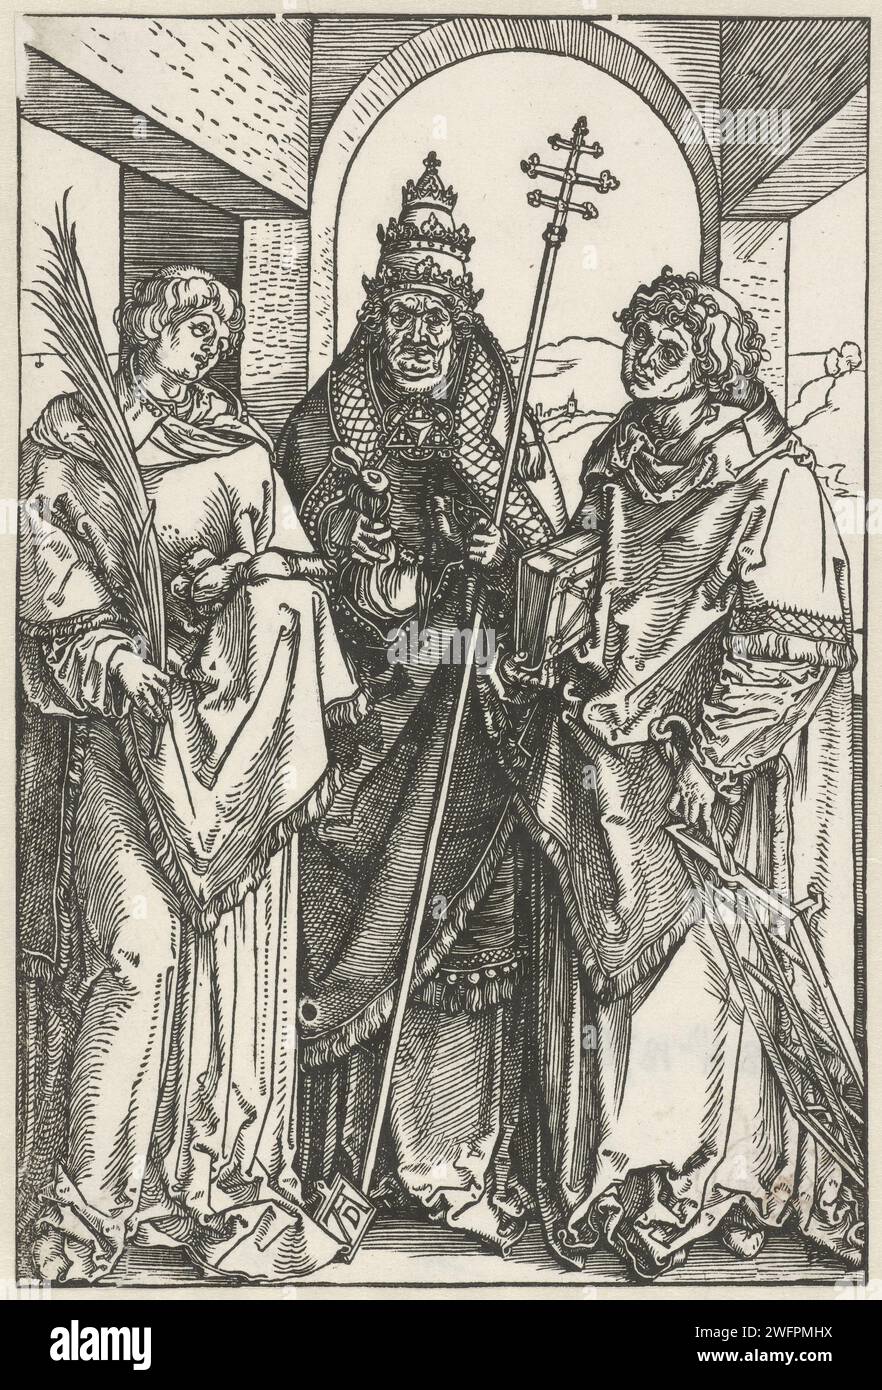 Saint Stefanus, Sixtus and Laurentius, Albrecht Dürer, 1504 - 1505 print Saint Stefanus, Sixtus and Laurentius stand side by side in a room with 3 windows, which shows a landscape with a village. Stefanus is wearing a palm branch and stones, Sixtus a tiara, a fair and a staff, Laurentius a book and a grid. Nuremberg paper  the martyr and deacon Laurence of Rome; possible attributes: book, censer, cross, dalmatic, gridiron, palm, purse (or cup with golden coins). the pope and martyr Sixtus II; possible attributes: money-bag, deacons Felicissimus and Agapitus, sword. the deacon and (proto)martyr Stock Photo